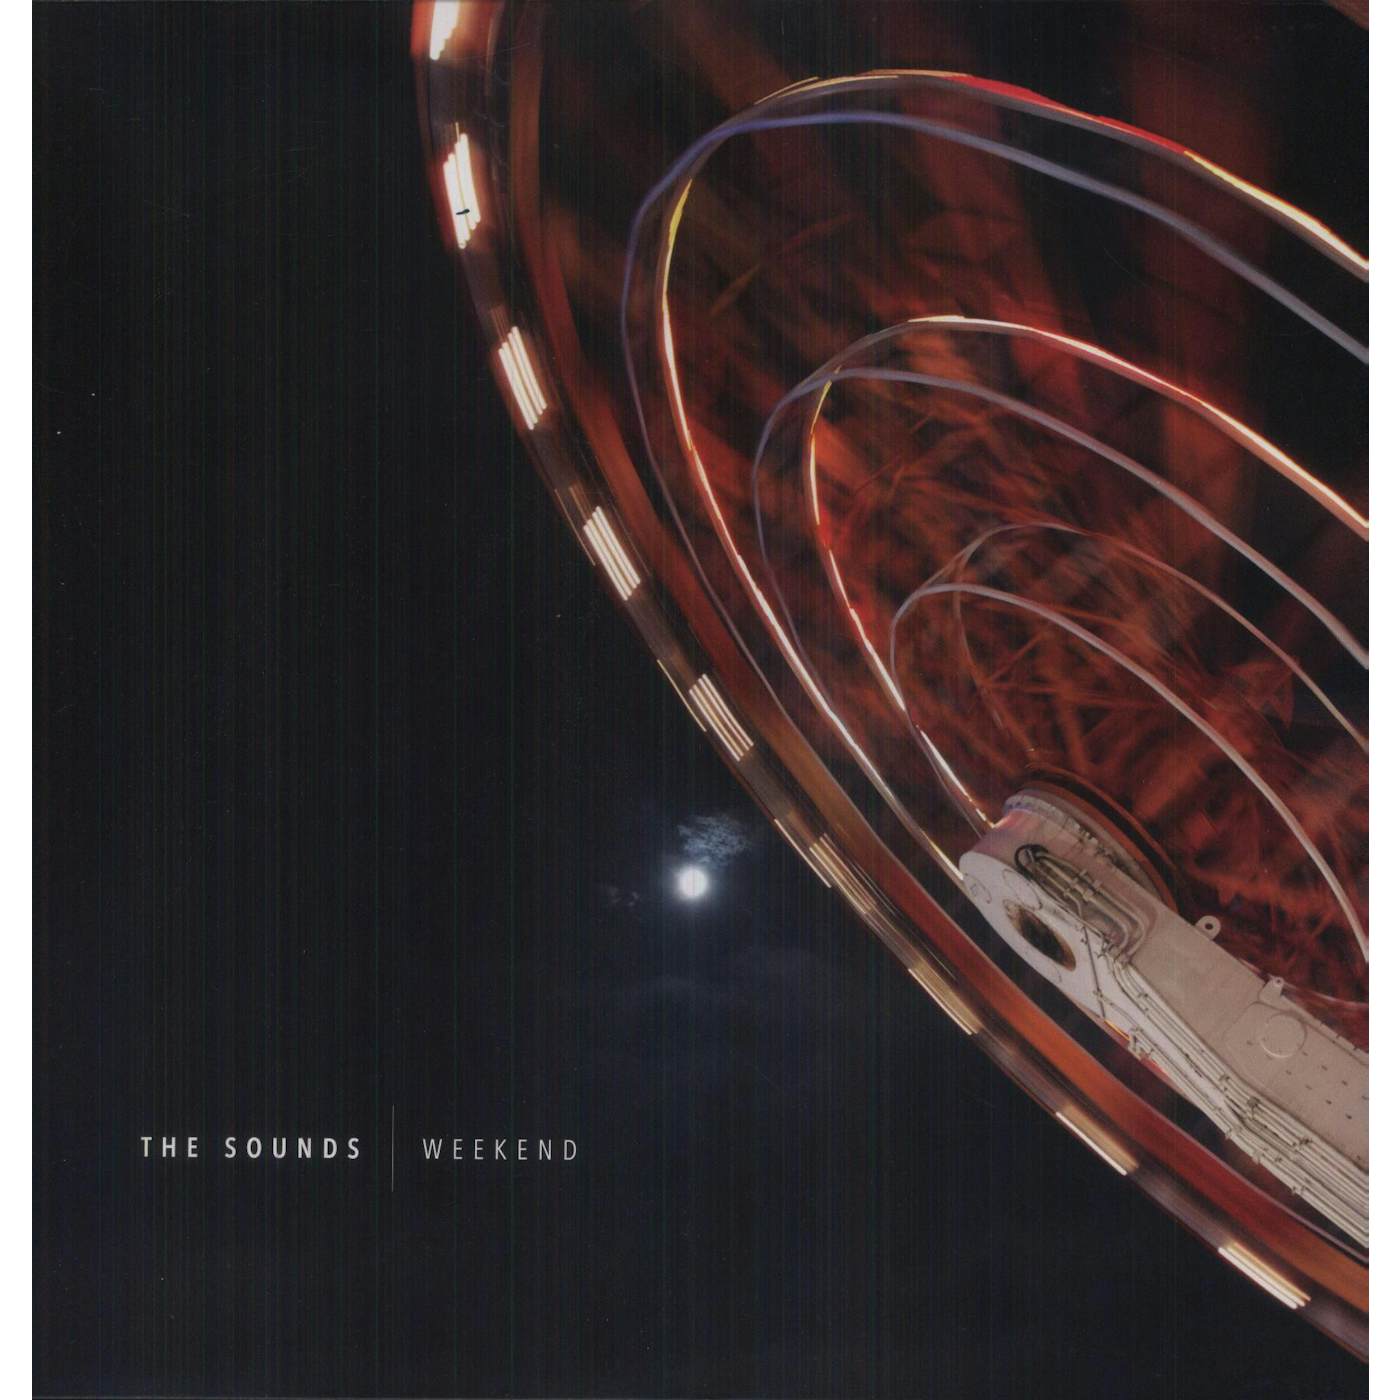 The Sounds Weekend Vinyl Record